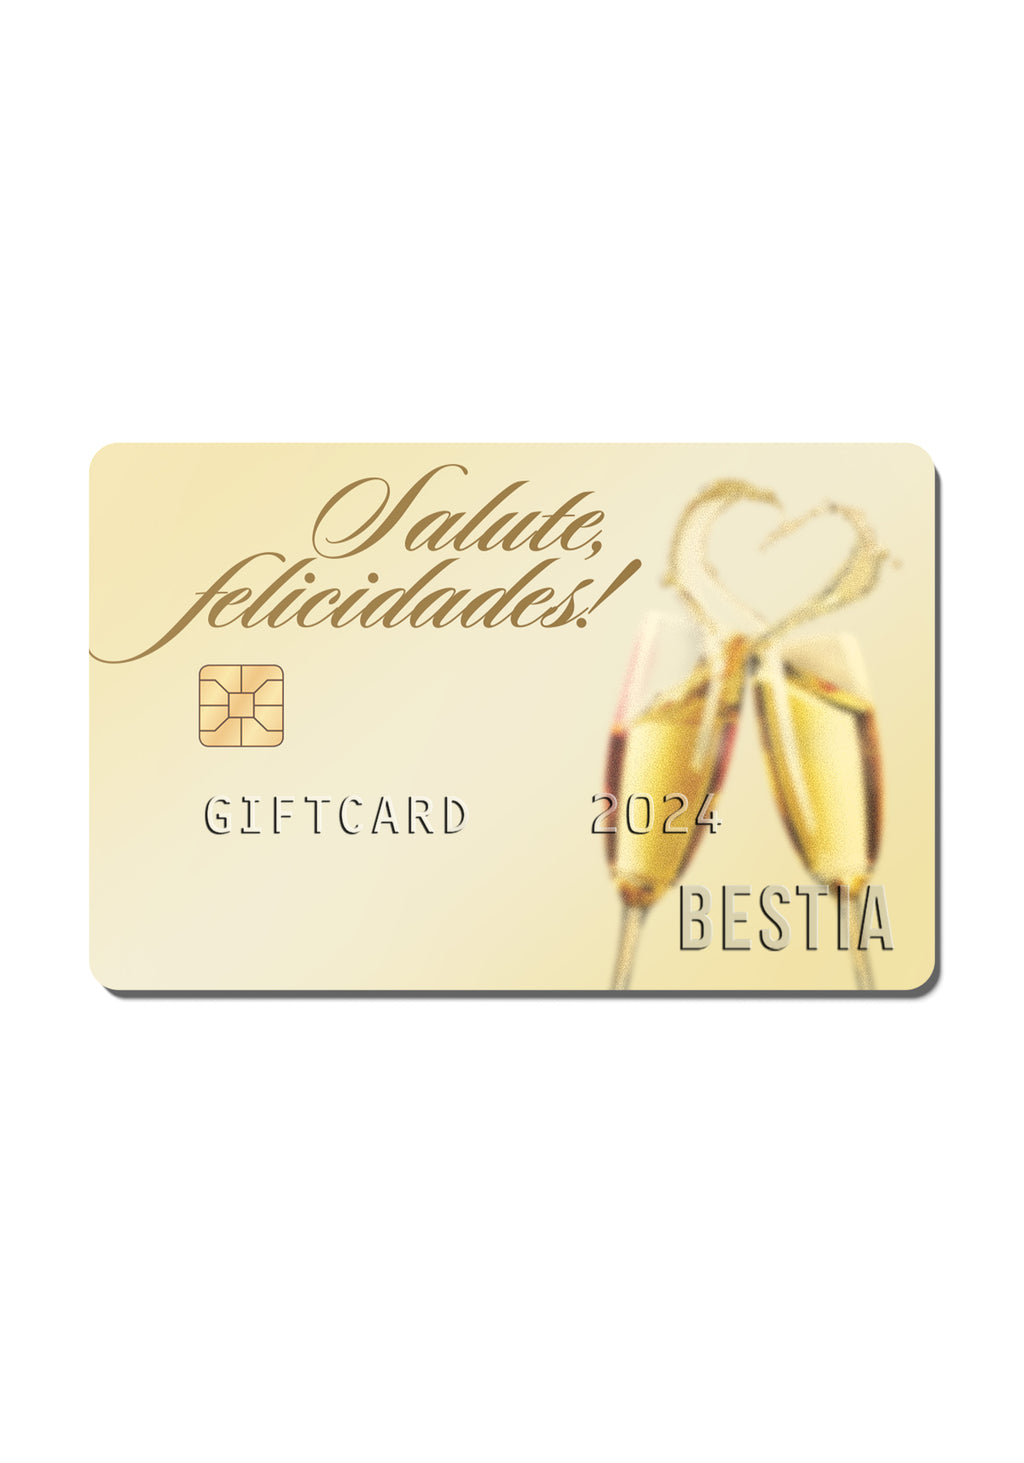 Gift card Salute